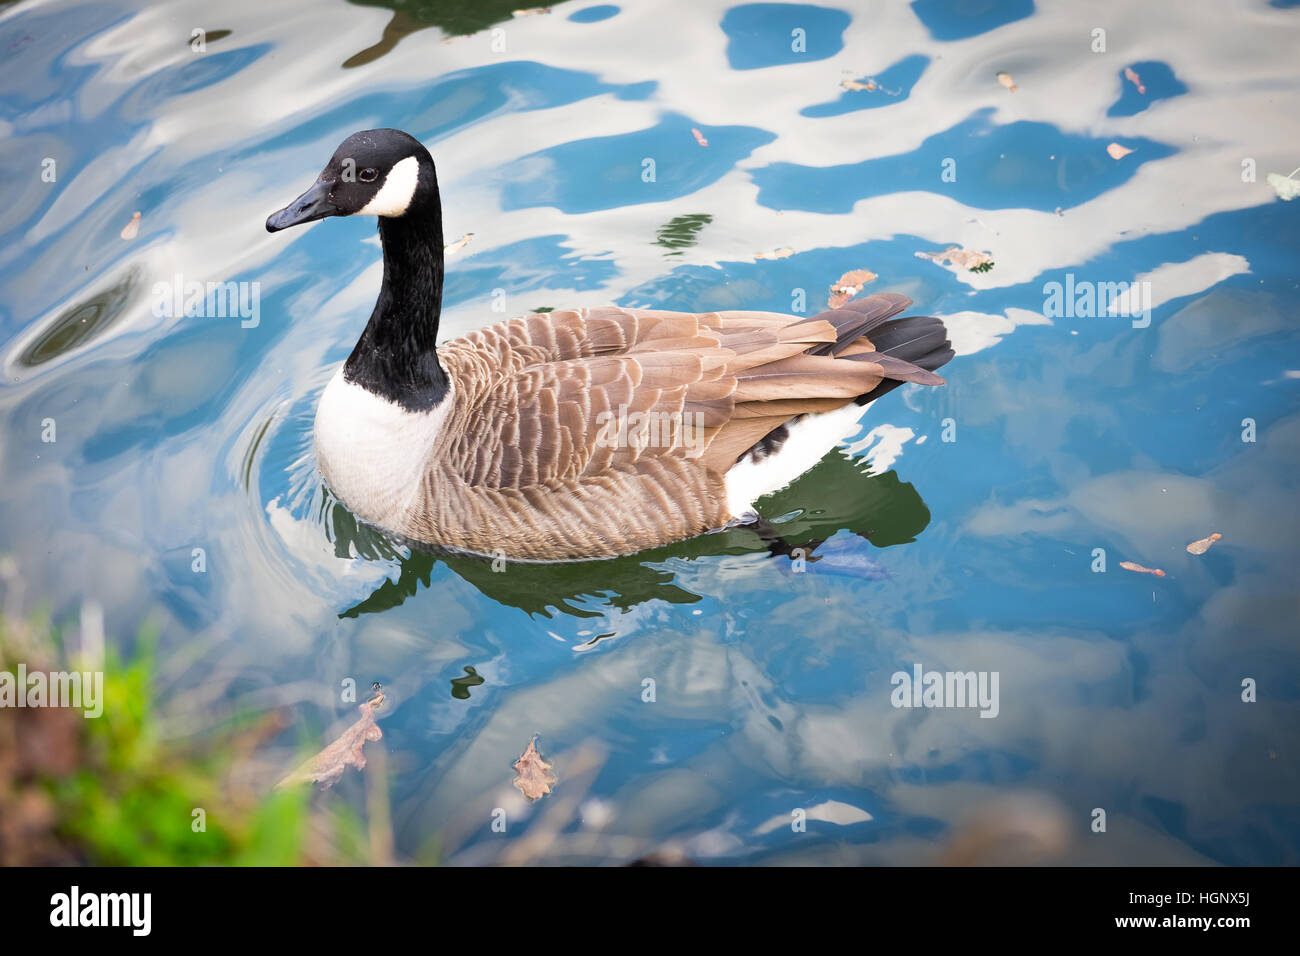 Goose swims on water Stock Photo